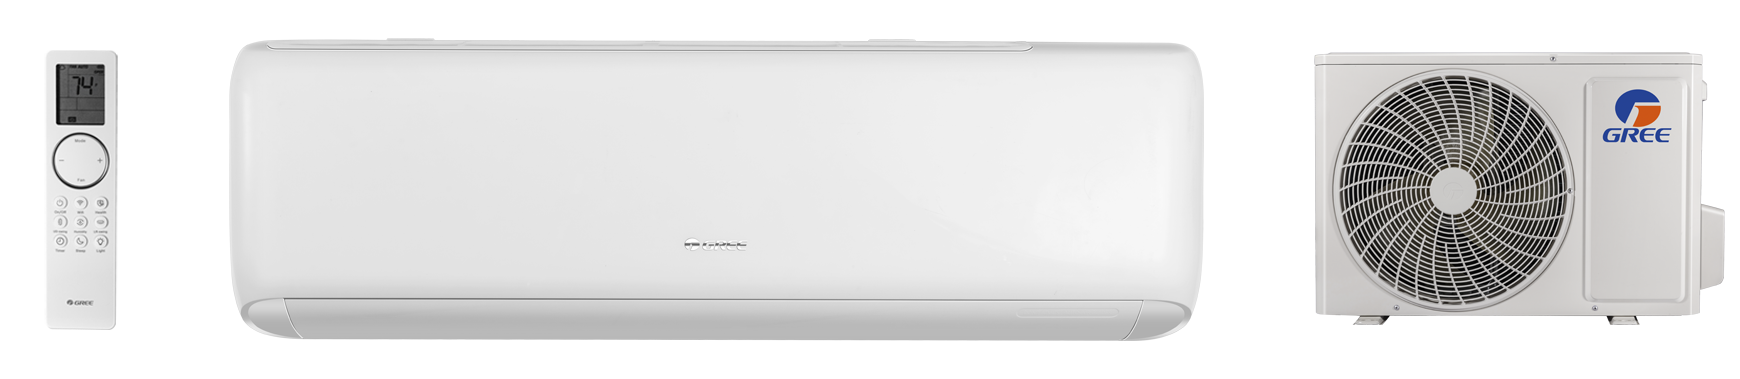 GREE Comfort Livo R32 single-zone ductless heating and cooling unit